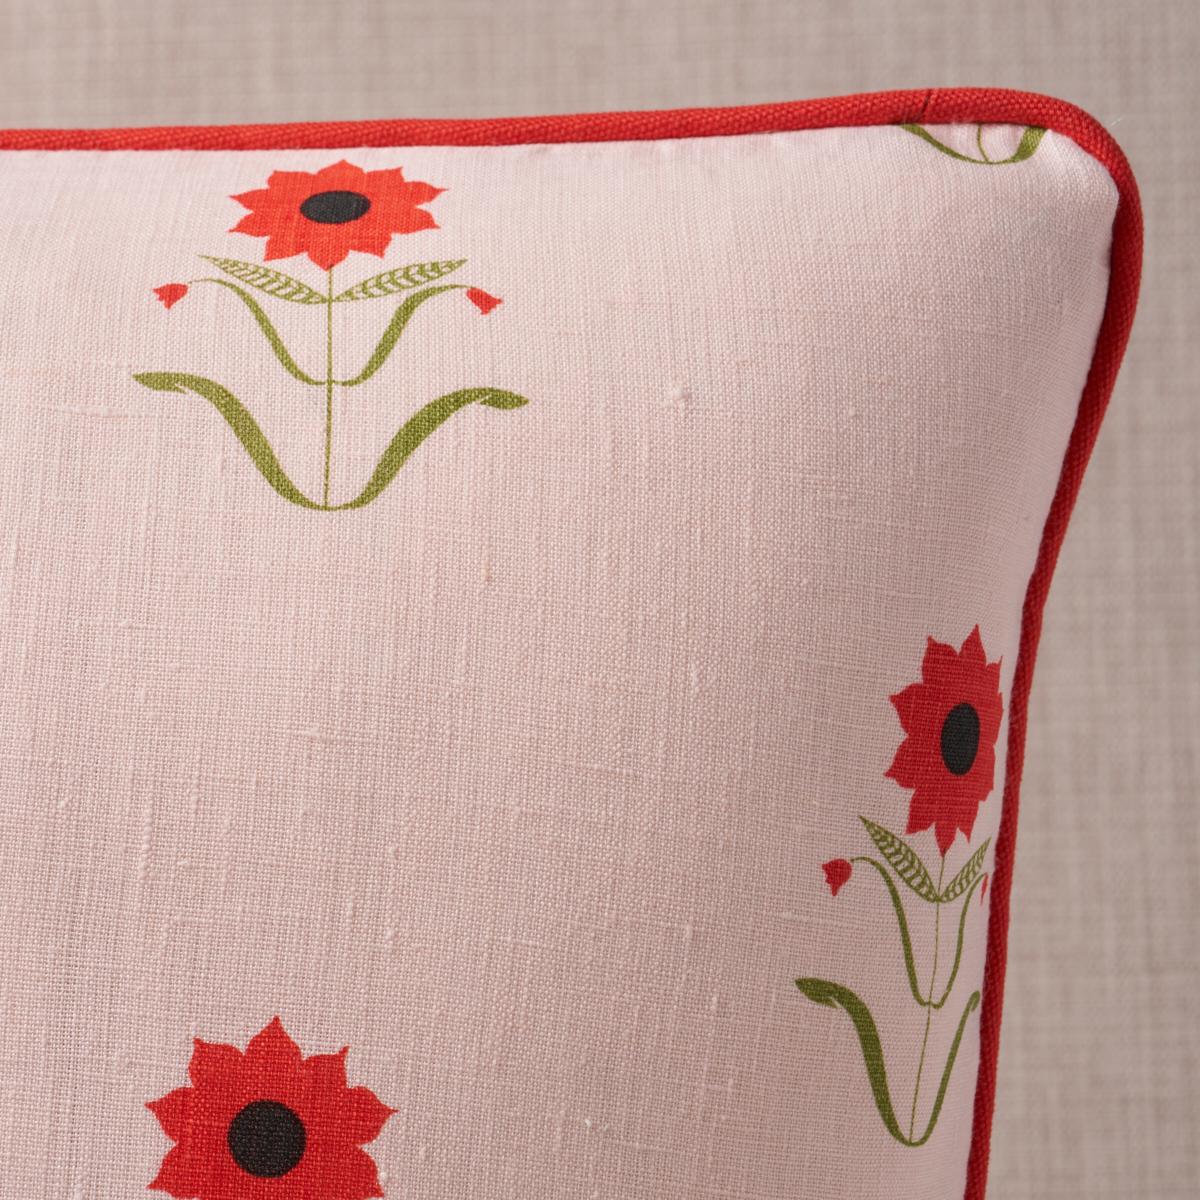 This pillow features Forget Me Nots by Peg Norriss. Forget Me Nots fabric derives its simple stylized floral pattern from a painting by artist Clare Rojas. A unique interpretation of a familiar motif, this medium-scale print works in traditional and